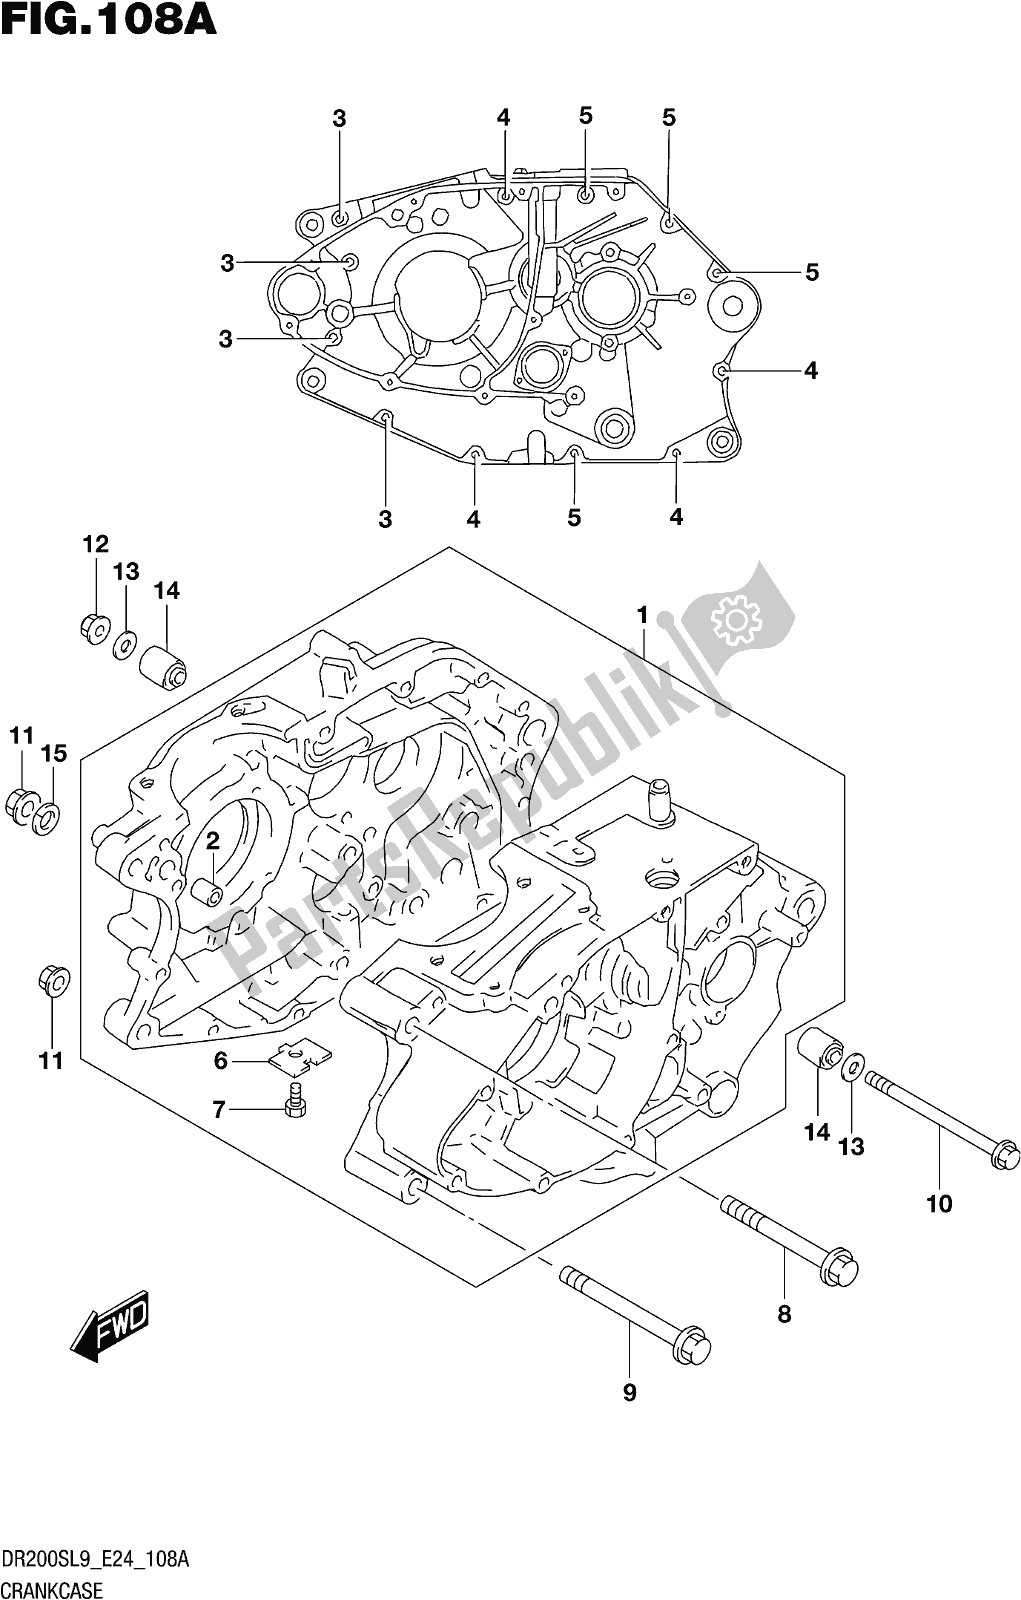 All parts for the Fig. 108a Crankcase of the Suzuki DR 200S 2019